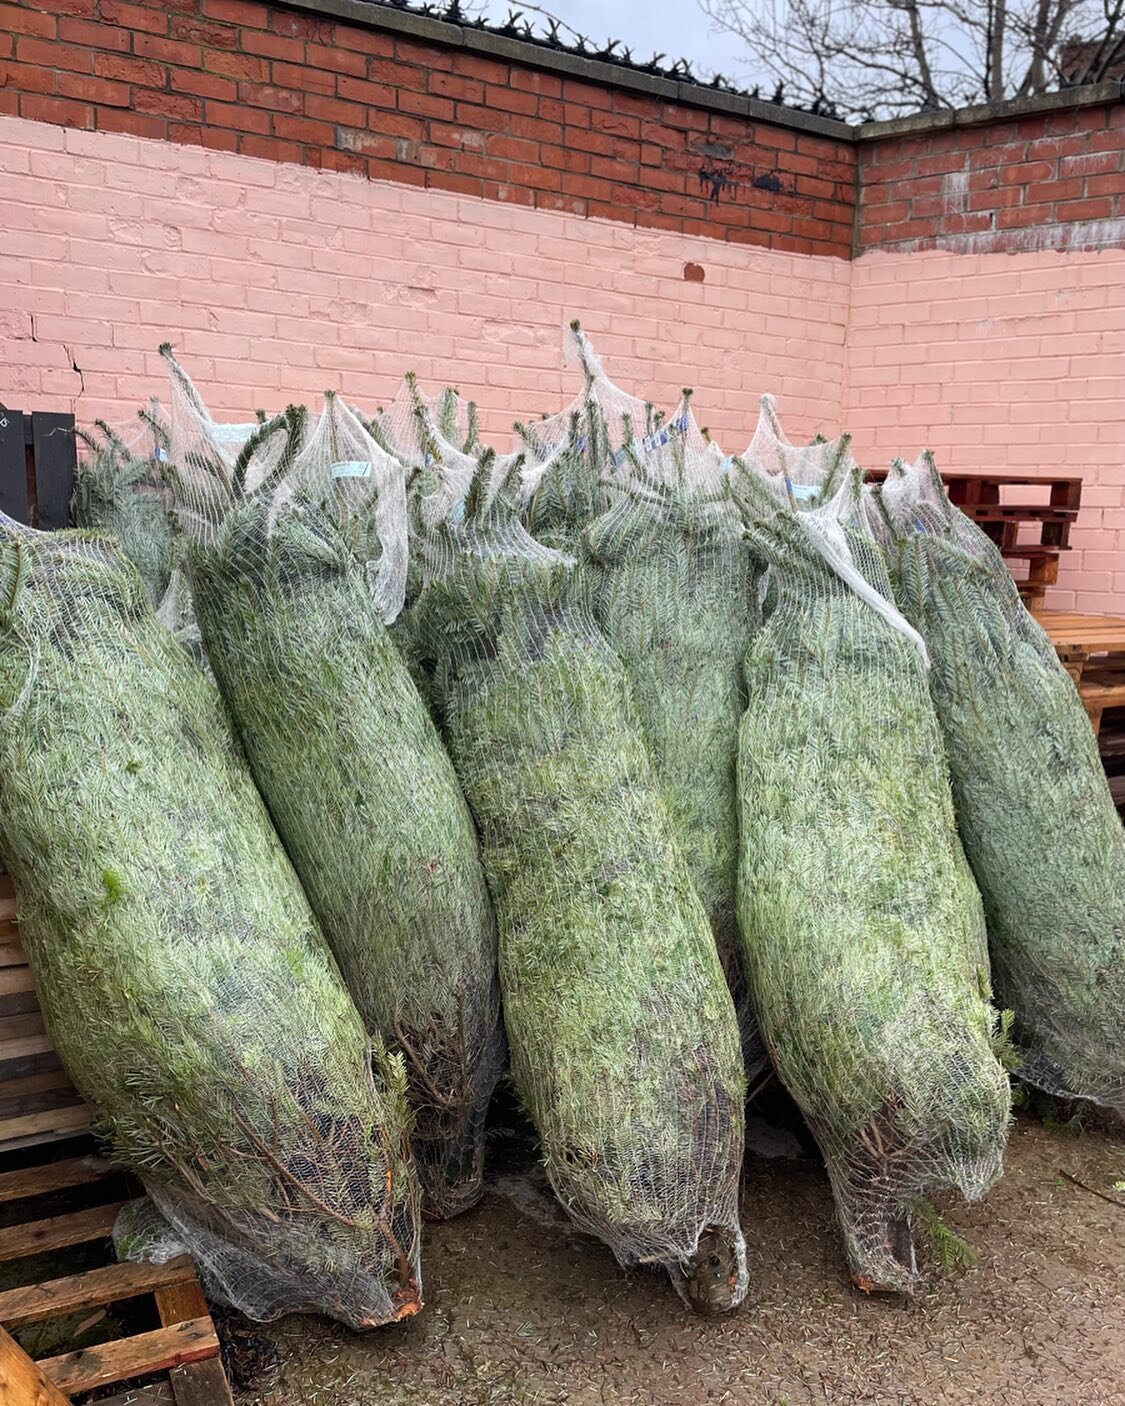 Christmas trees are here!! 🎄

We&rsquo;ve spoken to the majority of you who&rsquo;ve pre ordered, and left messages for anyone we couldn&rsquo;t get through to! 

Available to collect any time Tuesday-Saturday 9-4 🙂

If you&rsquo;d like to buy one,